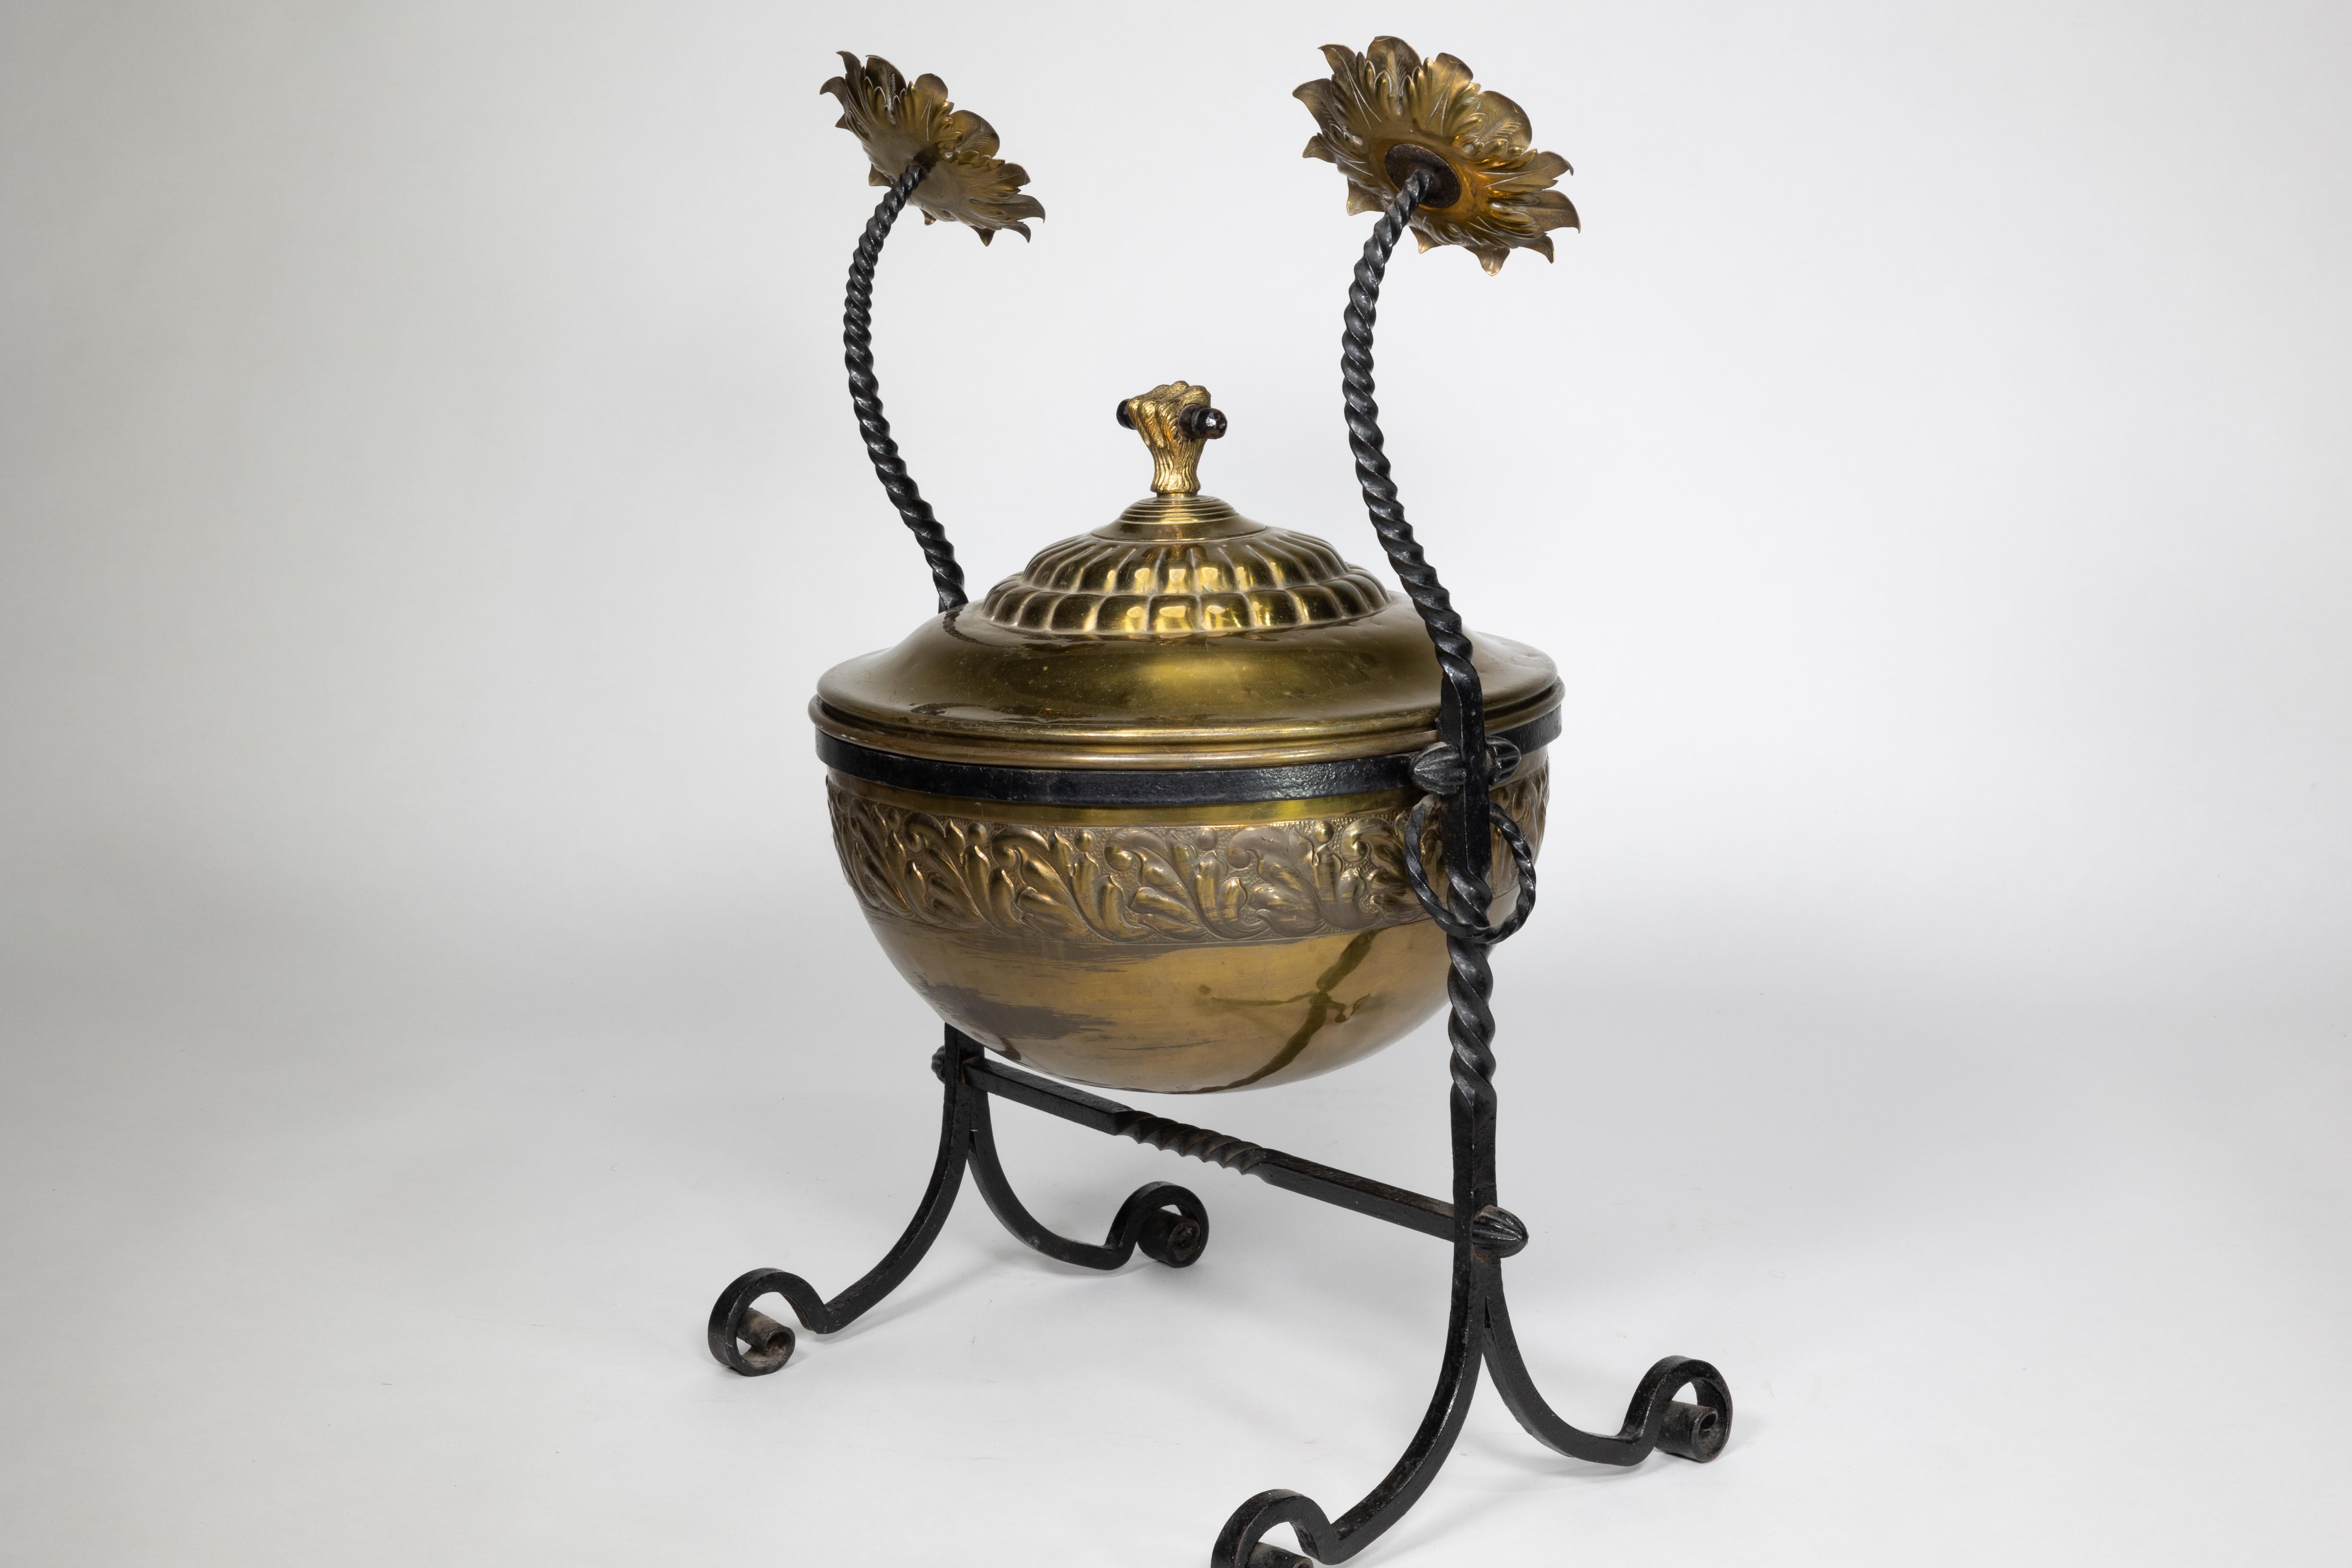 Wrought Iron An Aesthetic Movement wrought iron and copper fire bucket with sunflower finials For Sale